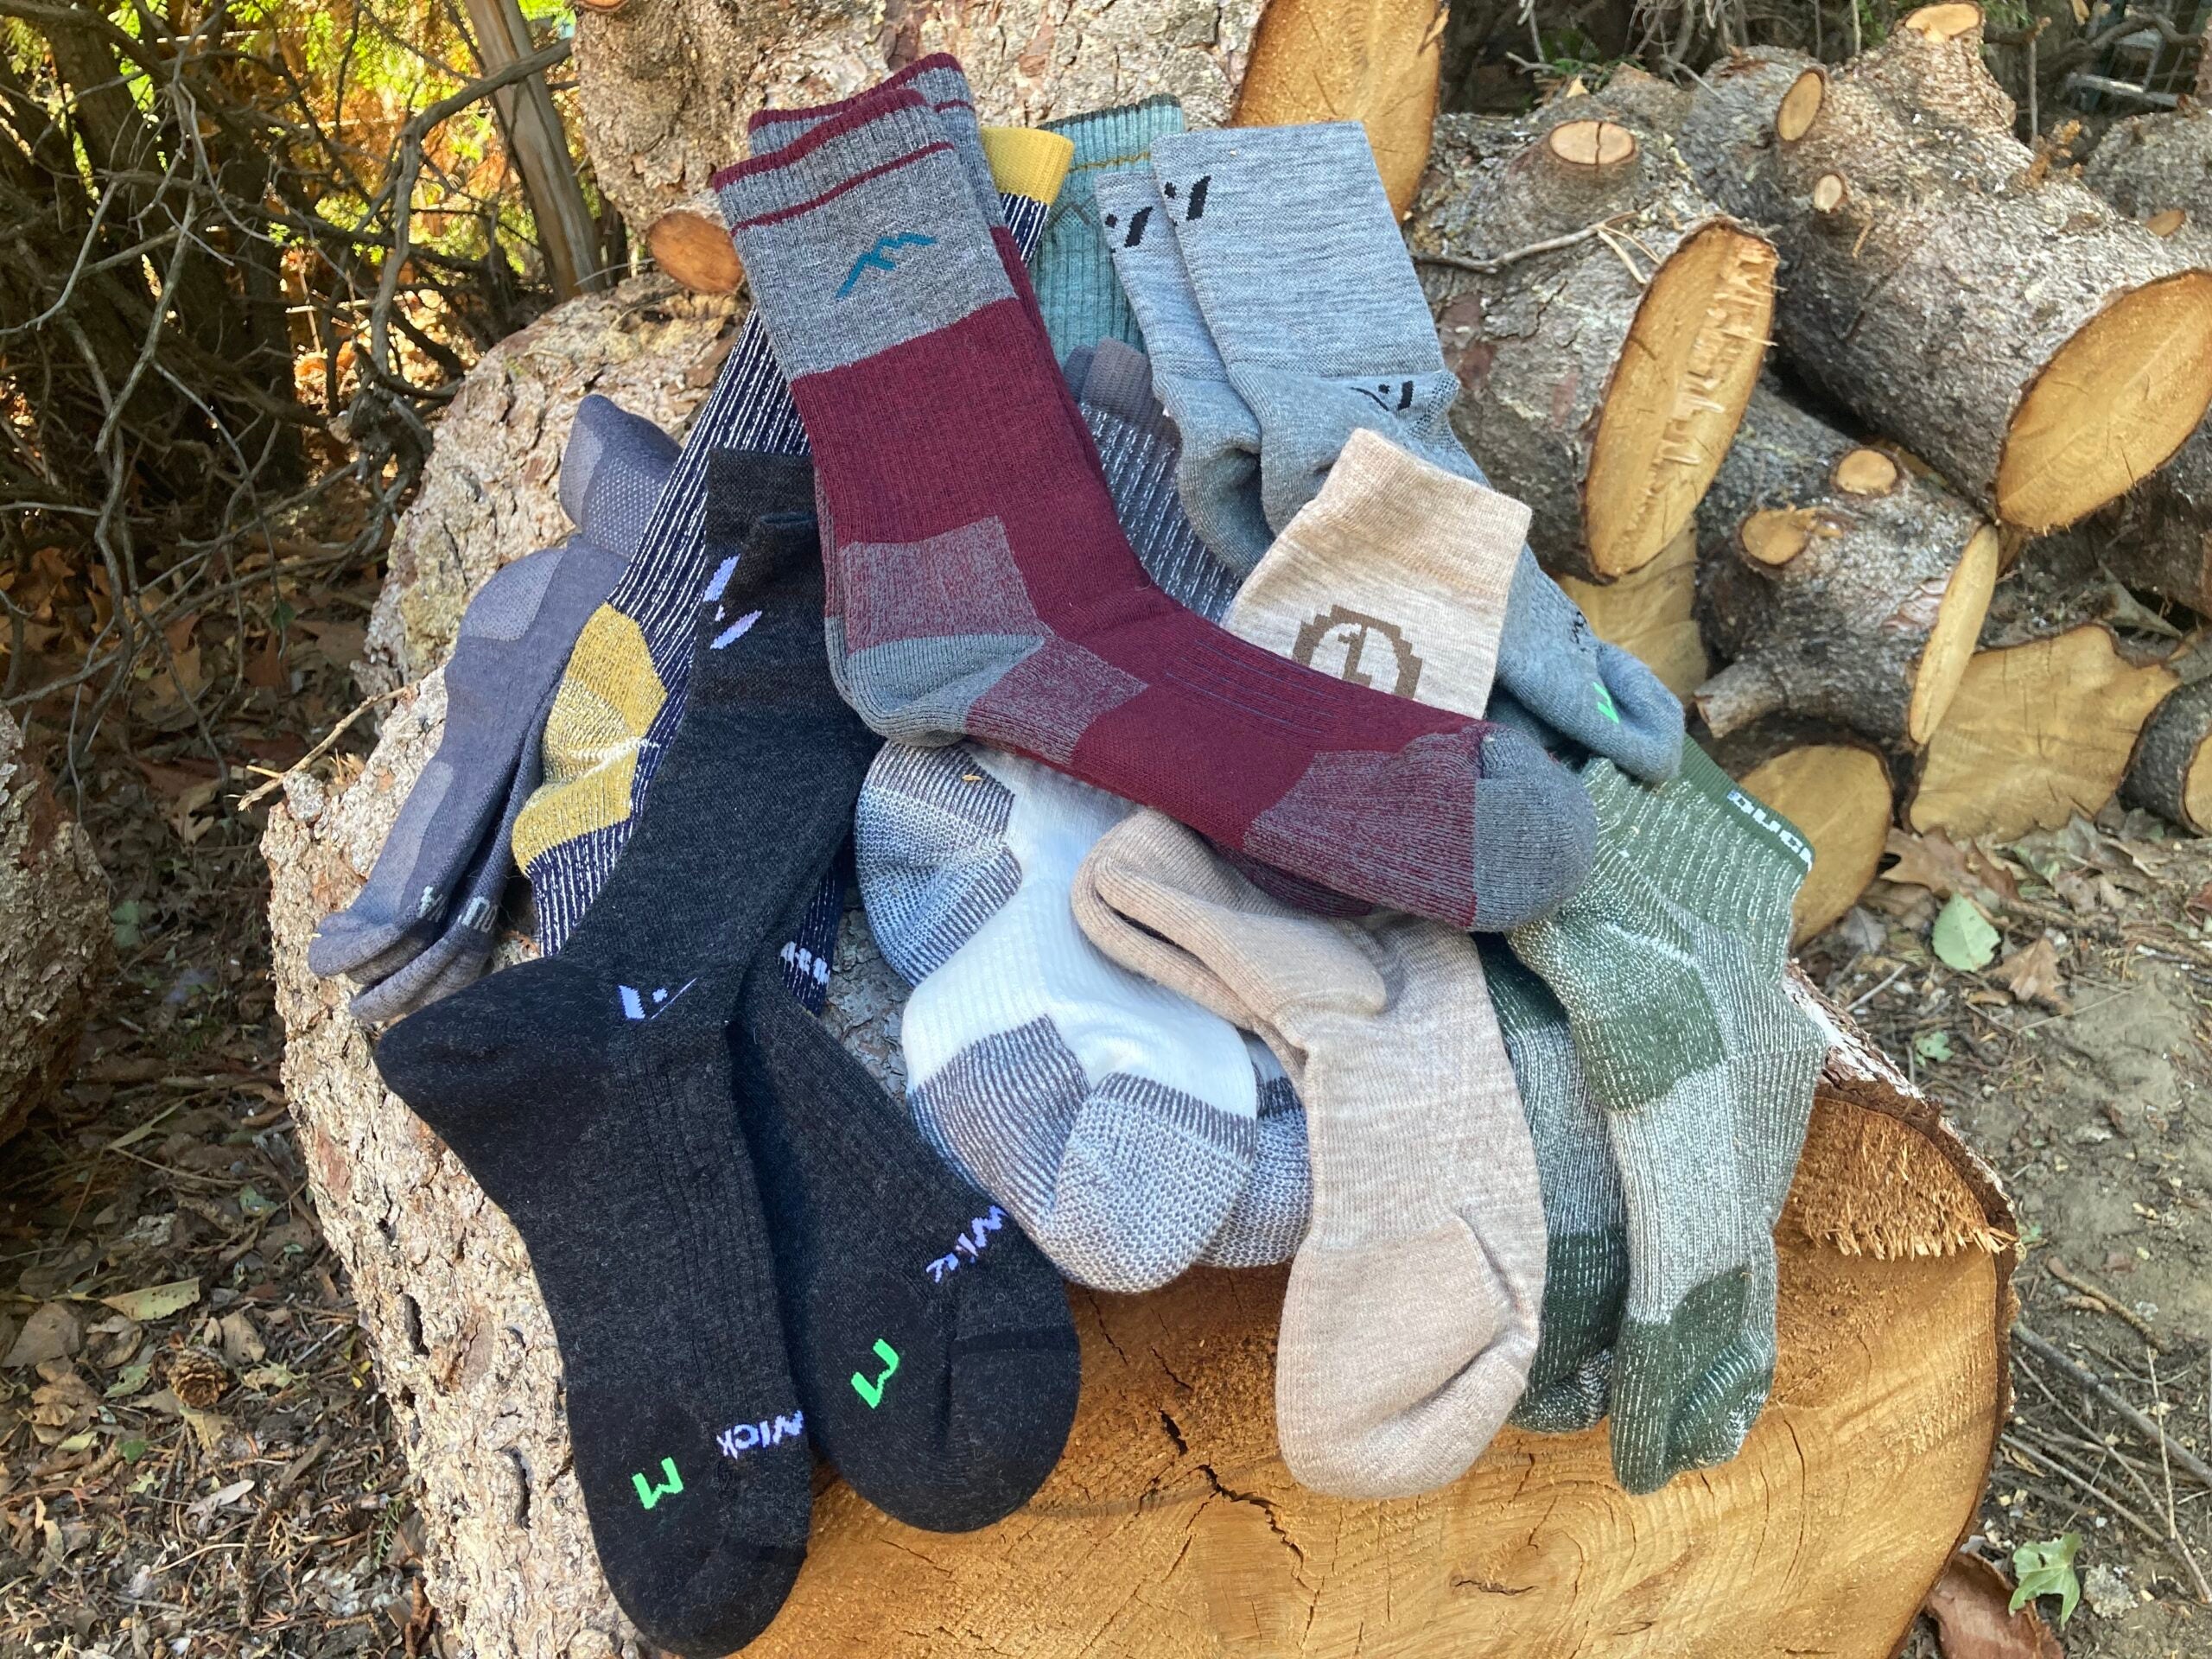 11 Best thermal socks for men you can buy in 2022